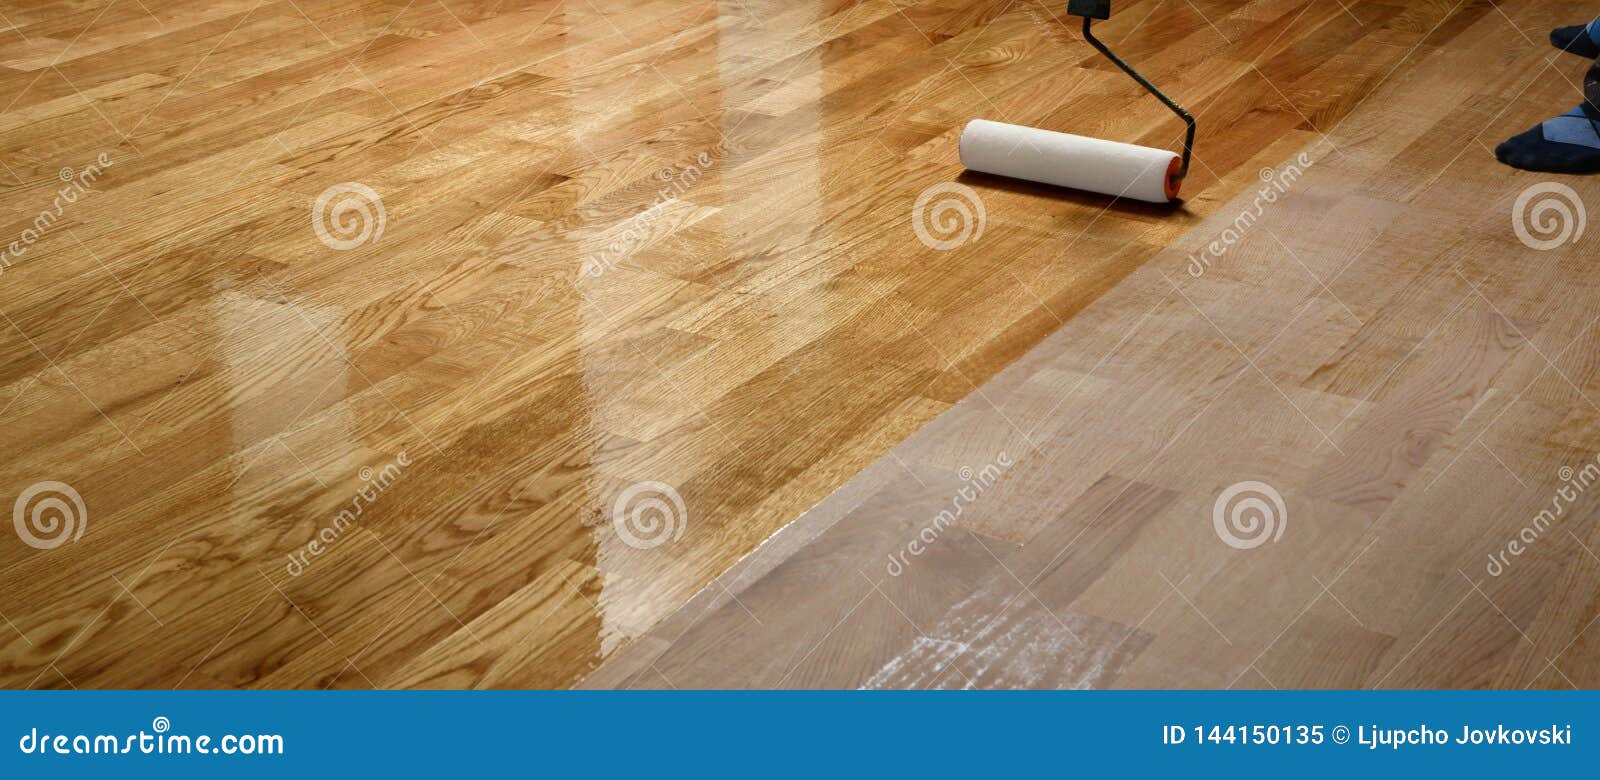 Lacquering Wood Floors Worker Uses A Roller To Coating Floors Stock Image Image Of Improvement Home 144150135